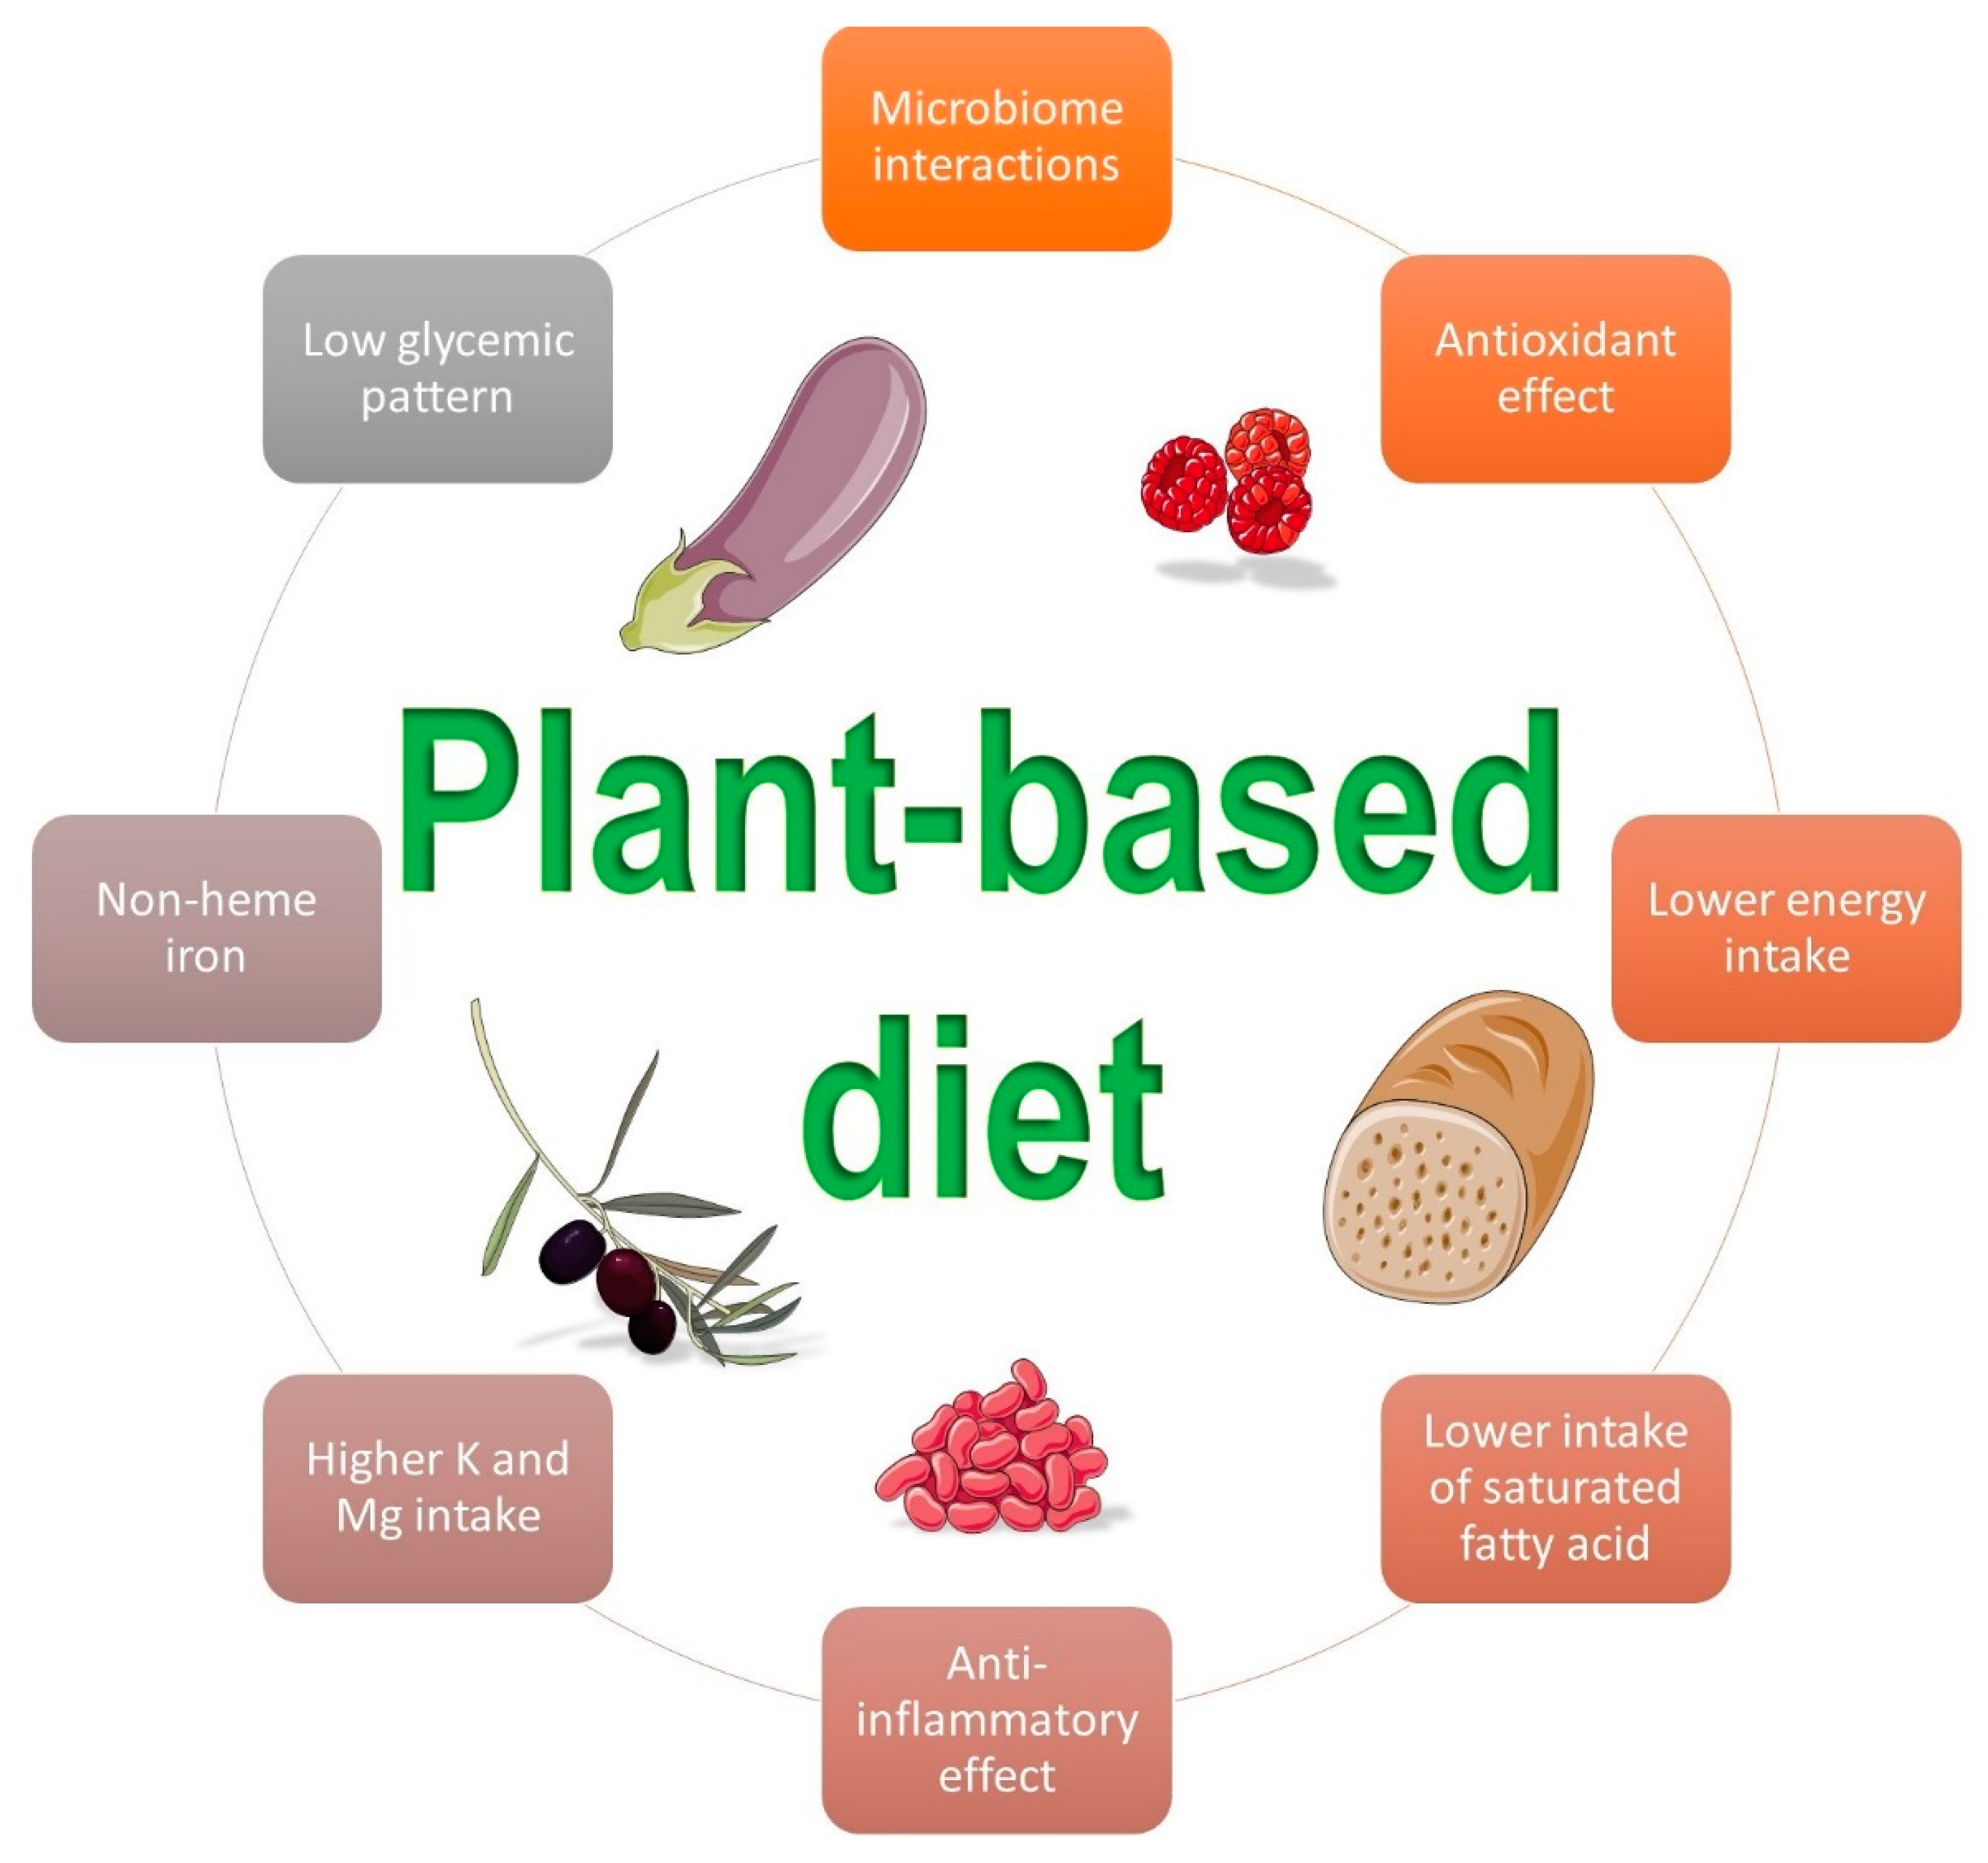 ASN Journals Examine Health Benefits of Plant-Based Diets